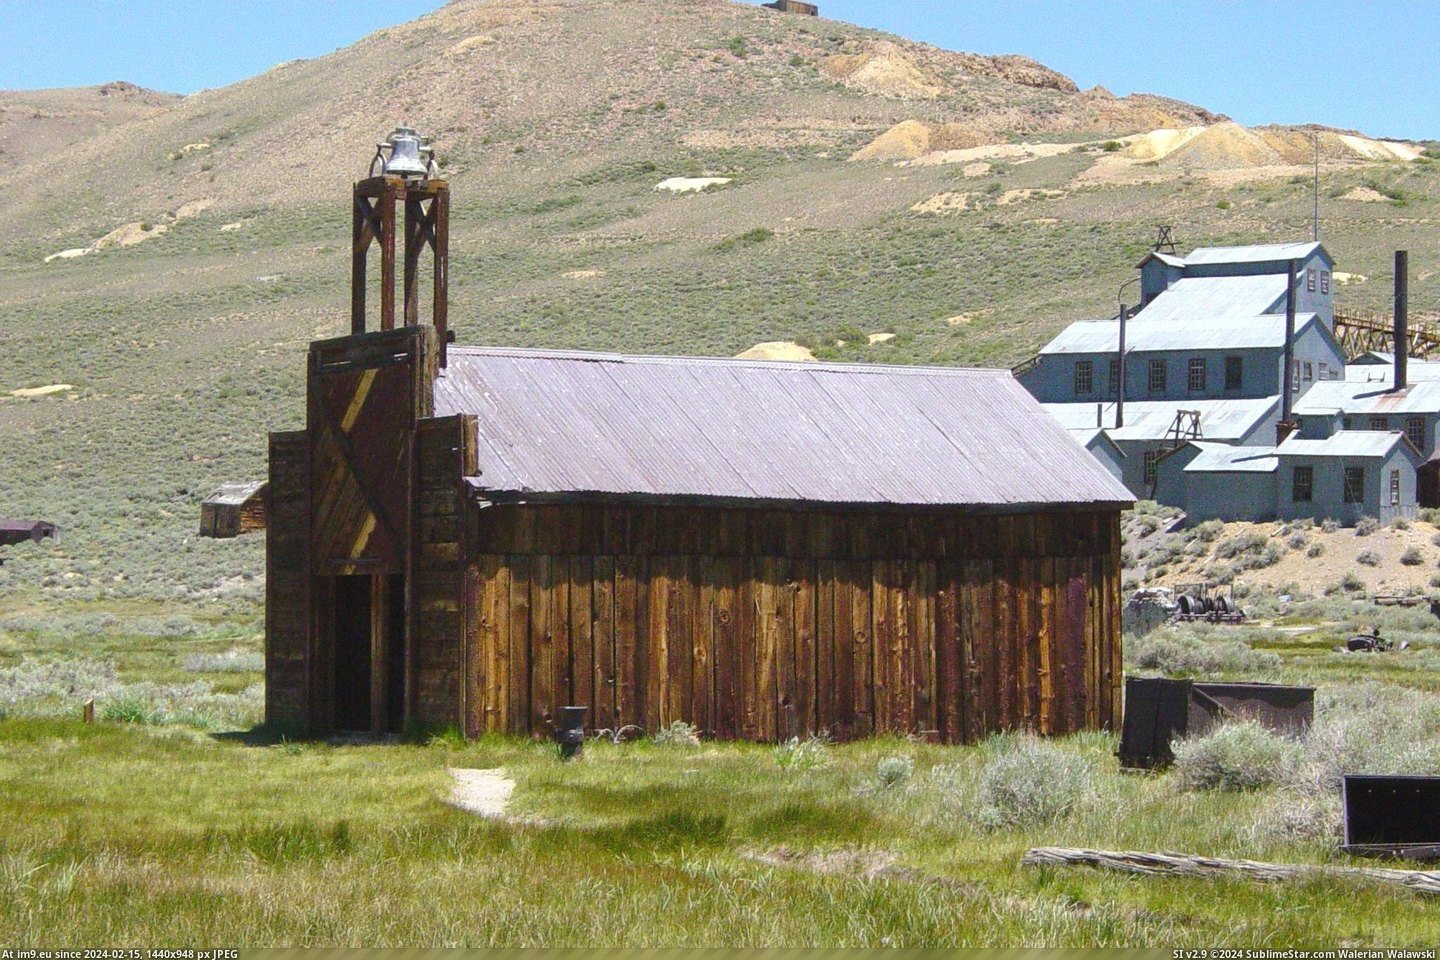 #California #Firehouse #Bodie Firehouse In Bodie, California Pic. (Image of album Bodie - a ghost town in Eastern California))